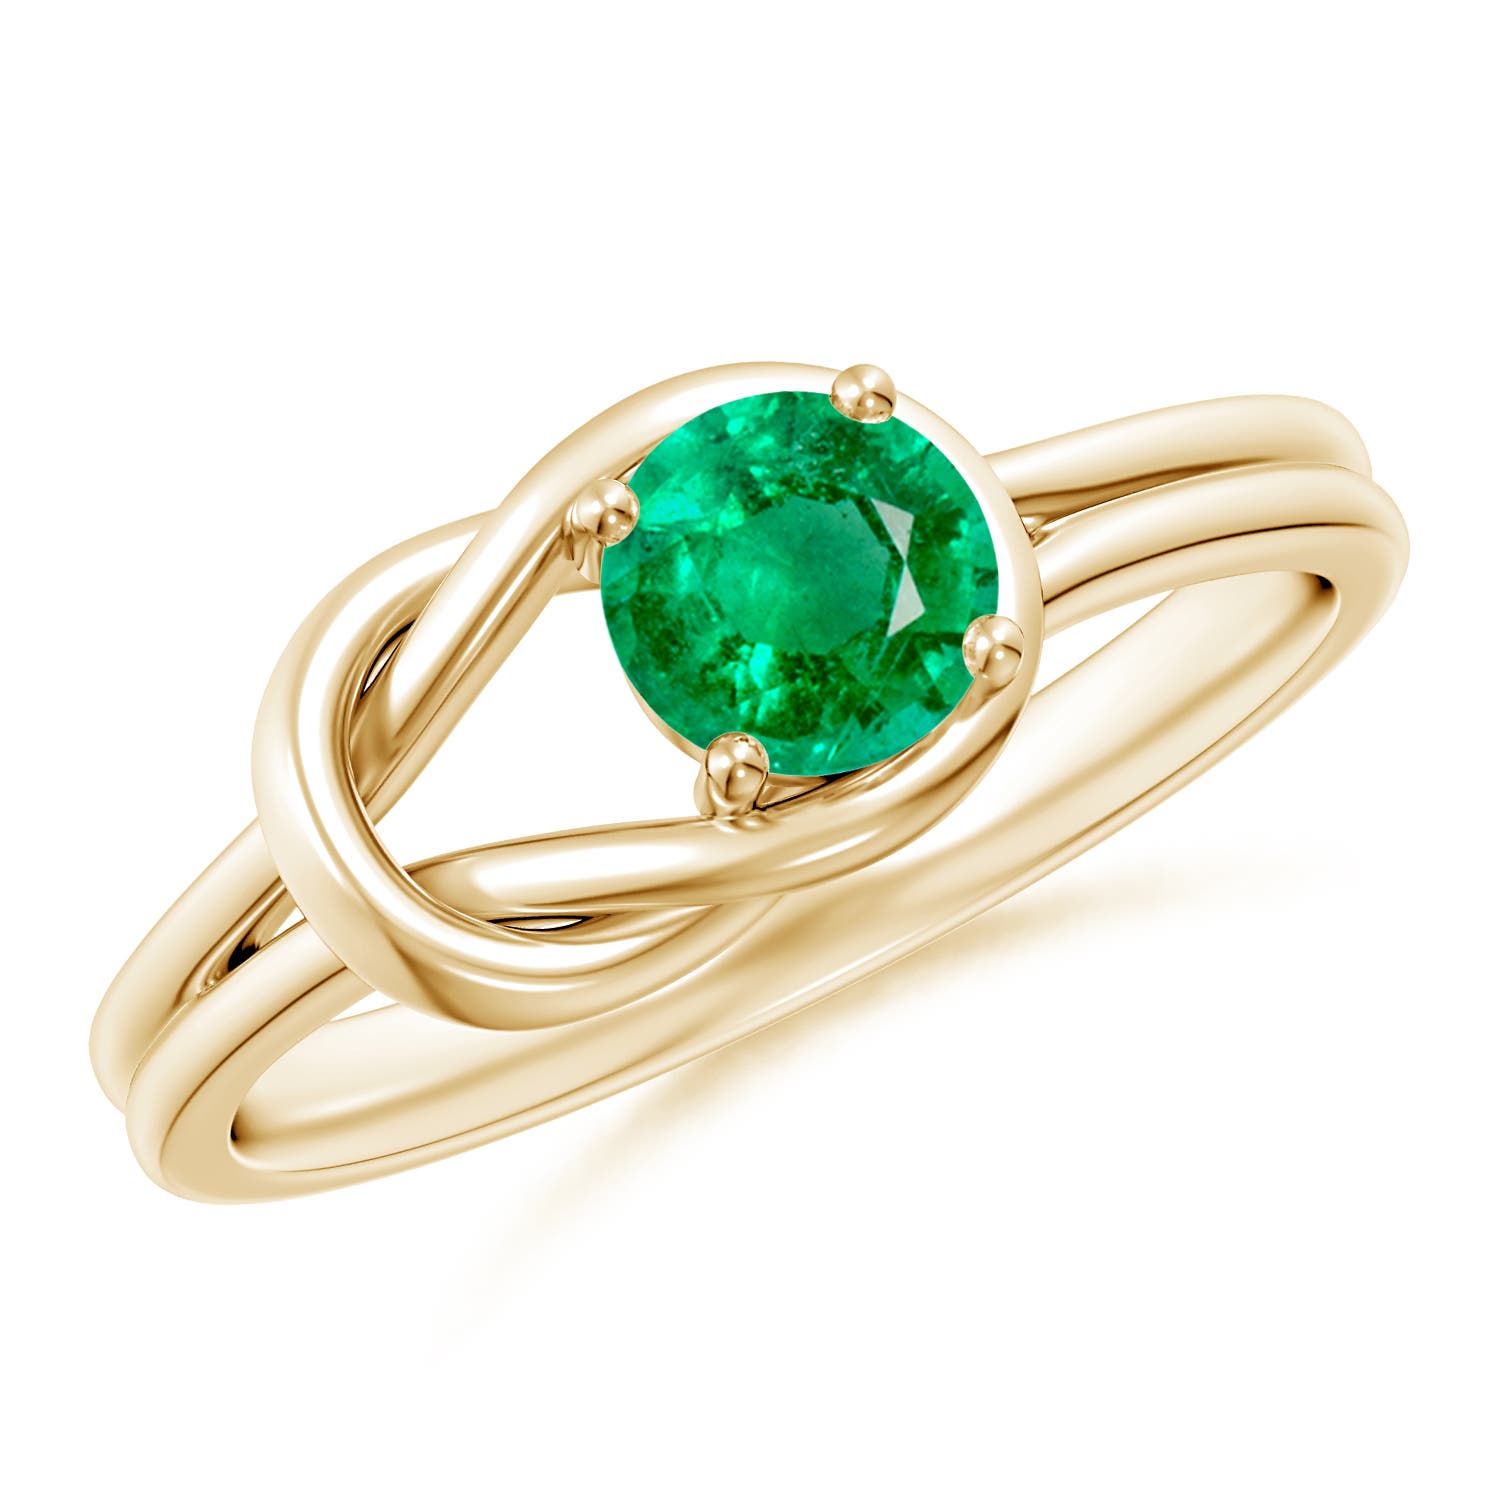 AAA - Emerald / 0.45 CT / 14 KT Yellow Gold